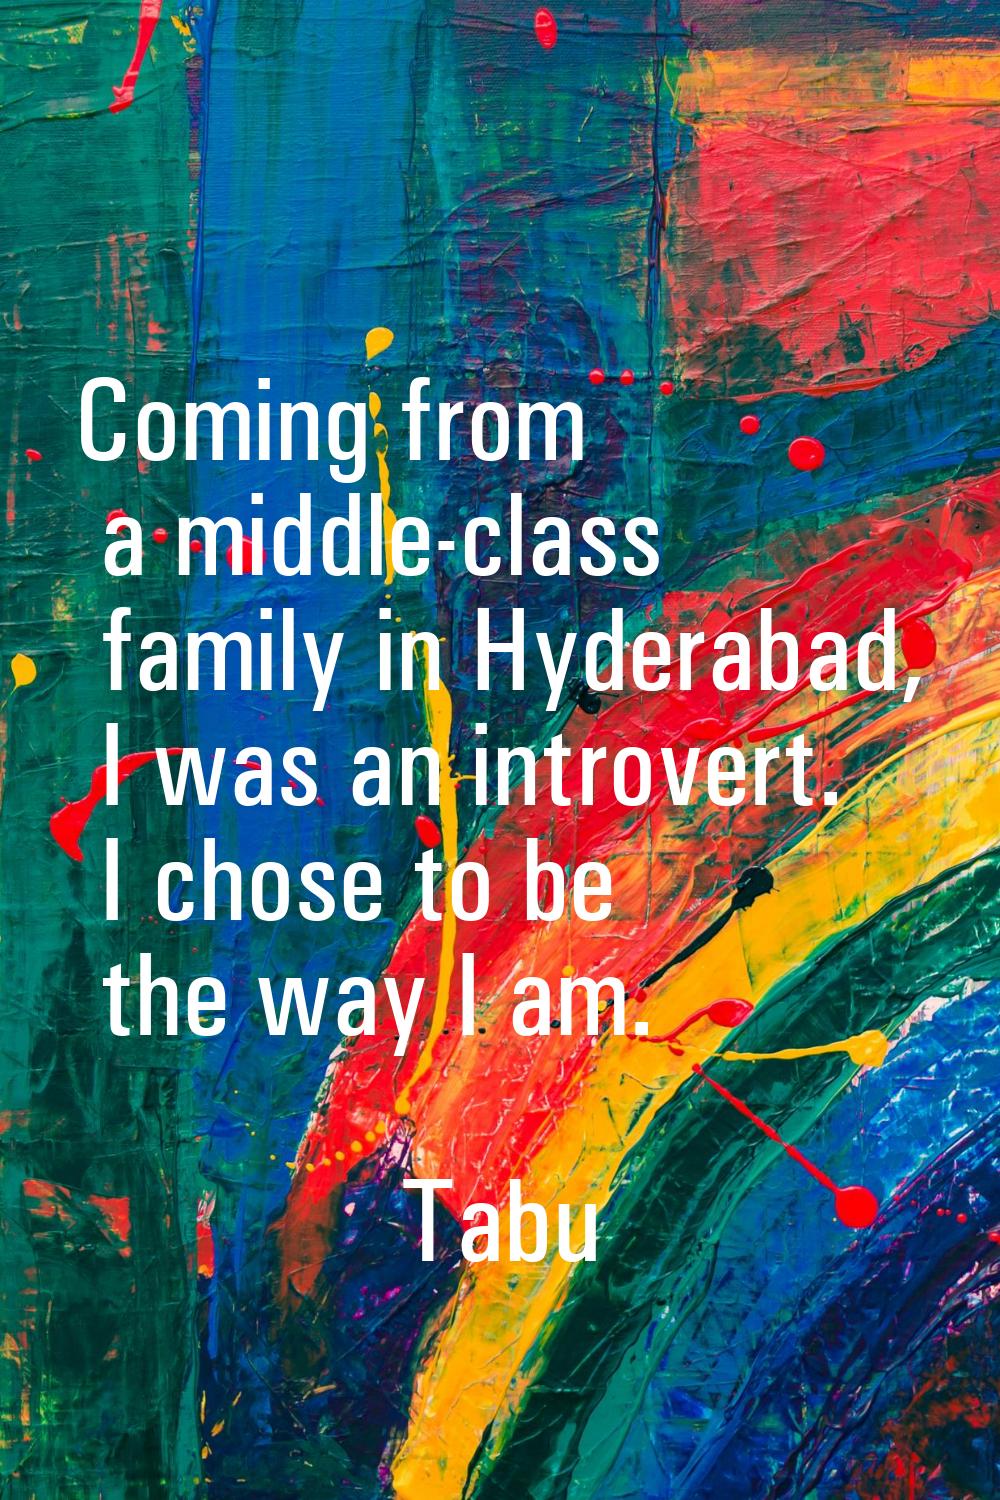 Coming from a middle-class family in Hyderabad, I was an introvert. I chose to be the way I am.